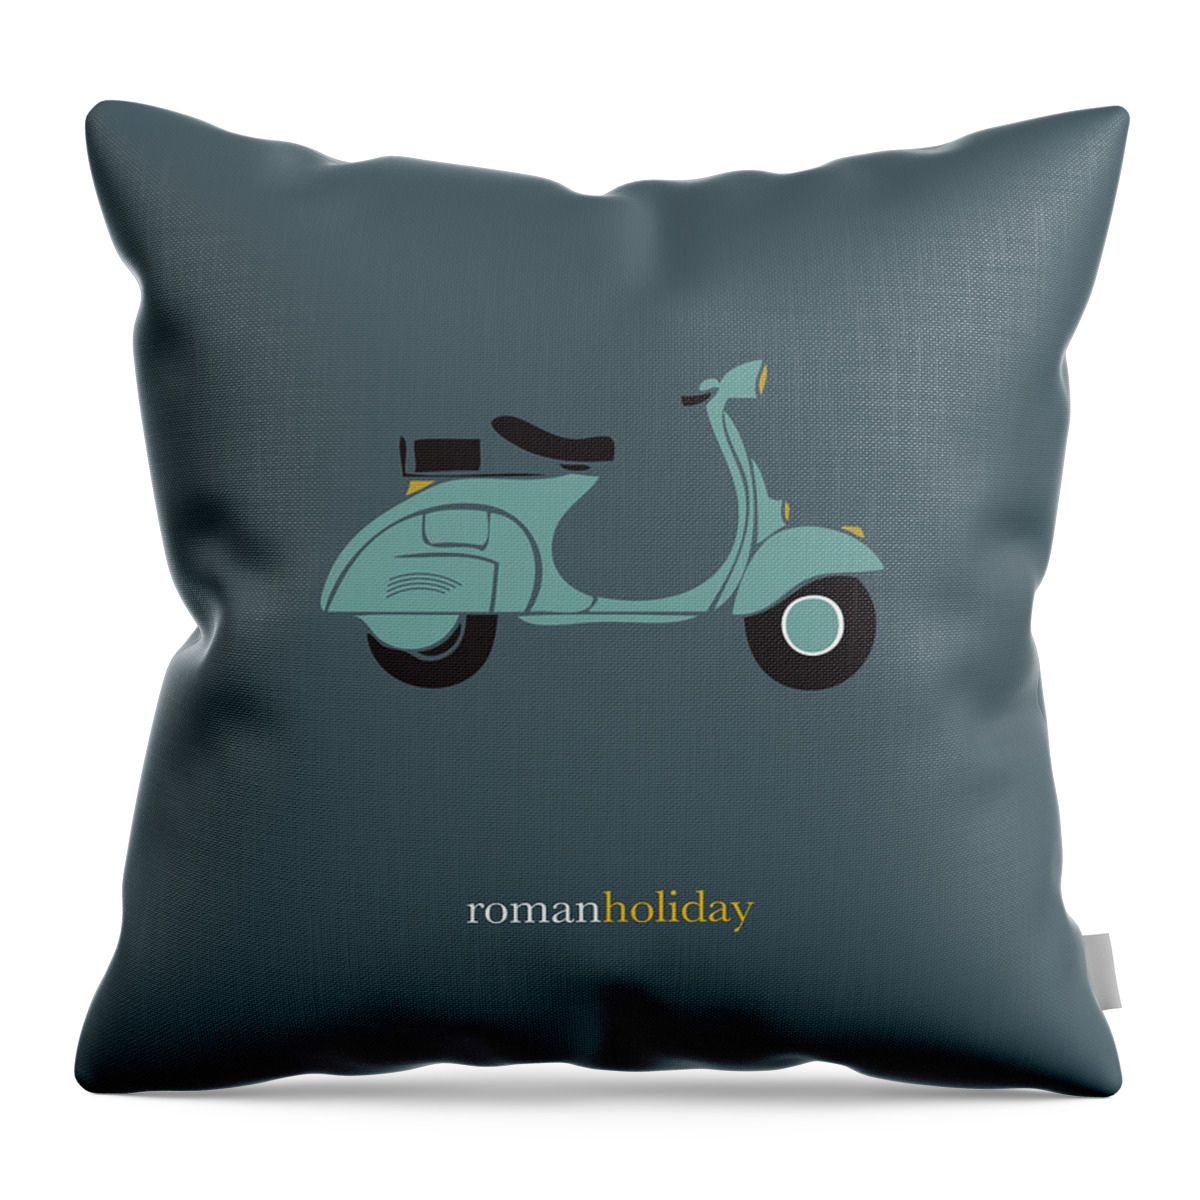 Roman Holiday Throw Pillow featuring the digital art Roman Holiday - Alternative Movie Poster by Movie Poster Boy